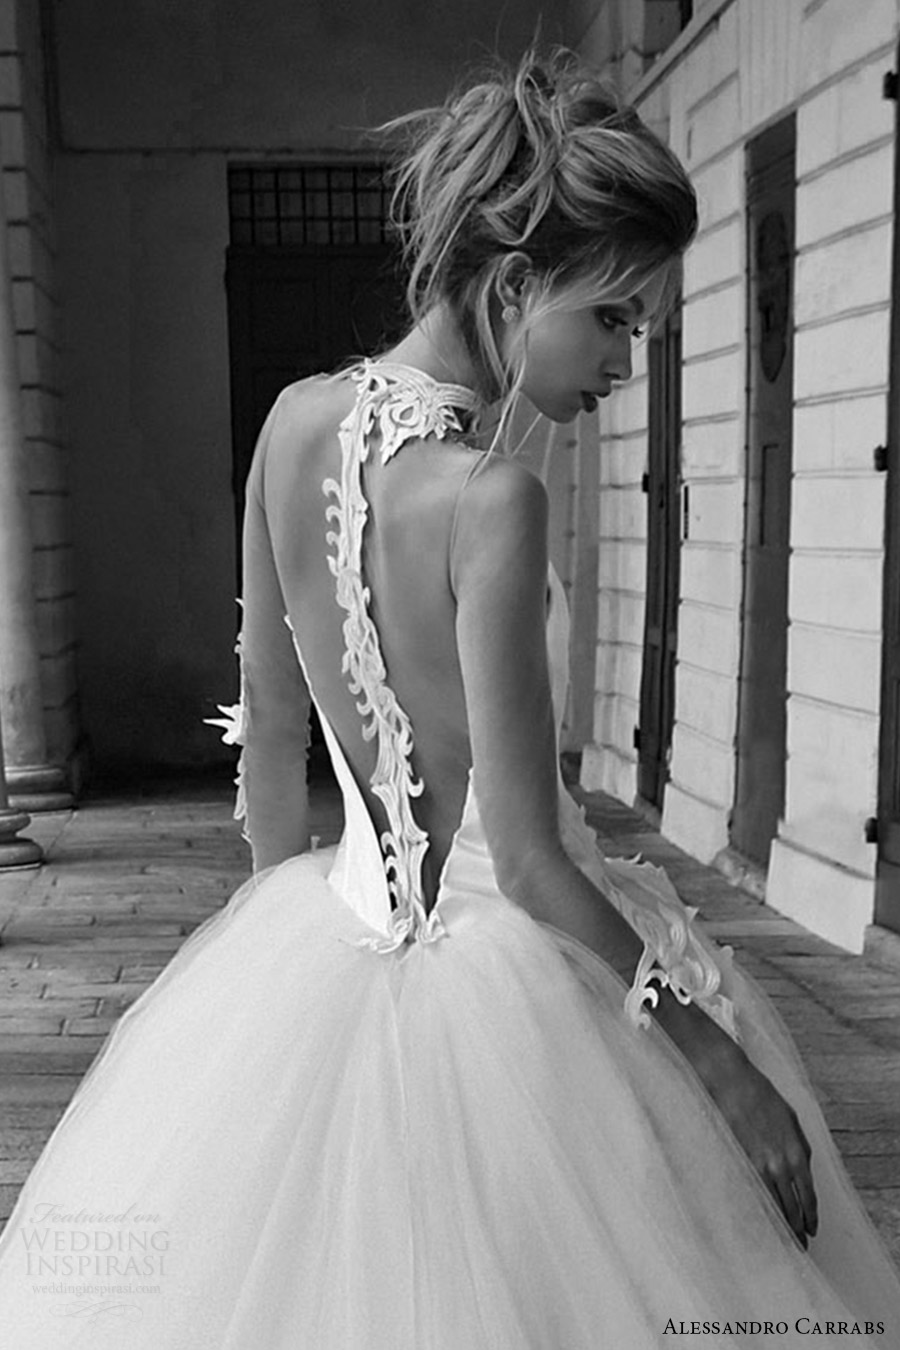 alessandro carrabs couture bridal 2016 illusion long sleeves sweetheart collar ball gown wedding dress (020) zbv low back romantic long train